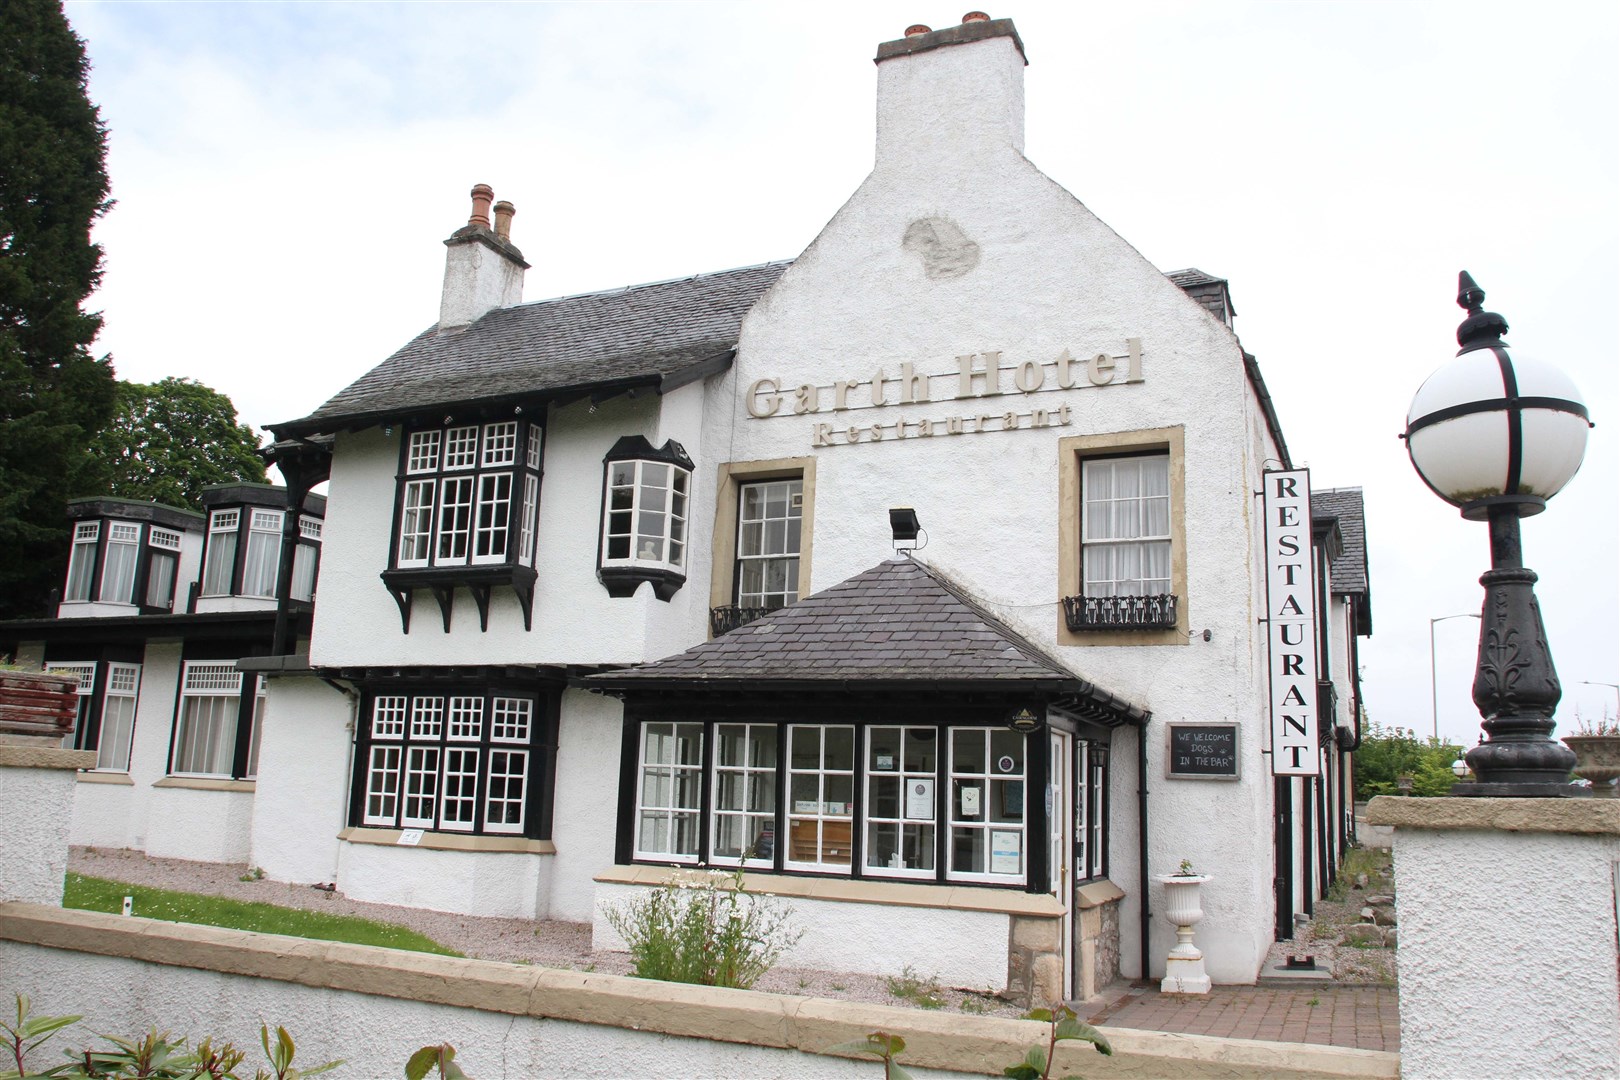 The Garth Hotel in Grantown is one of the oldest surviving buildings in Strathspey.